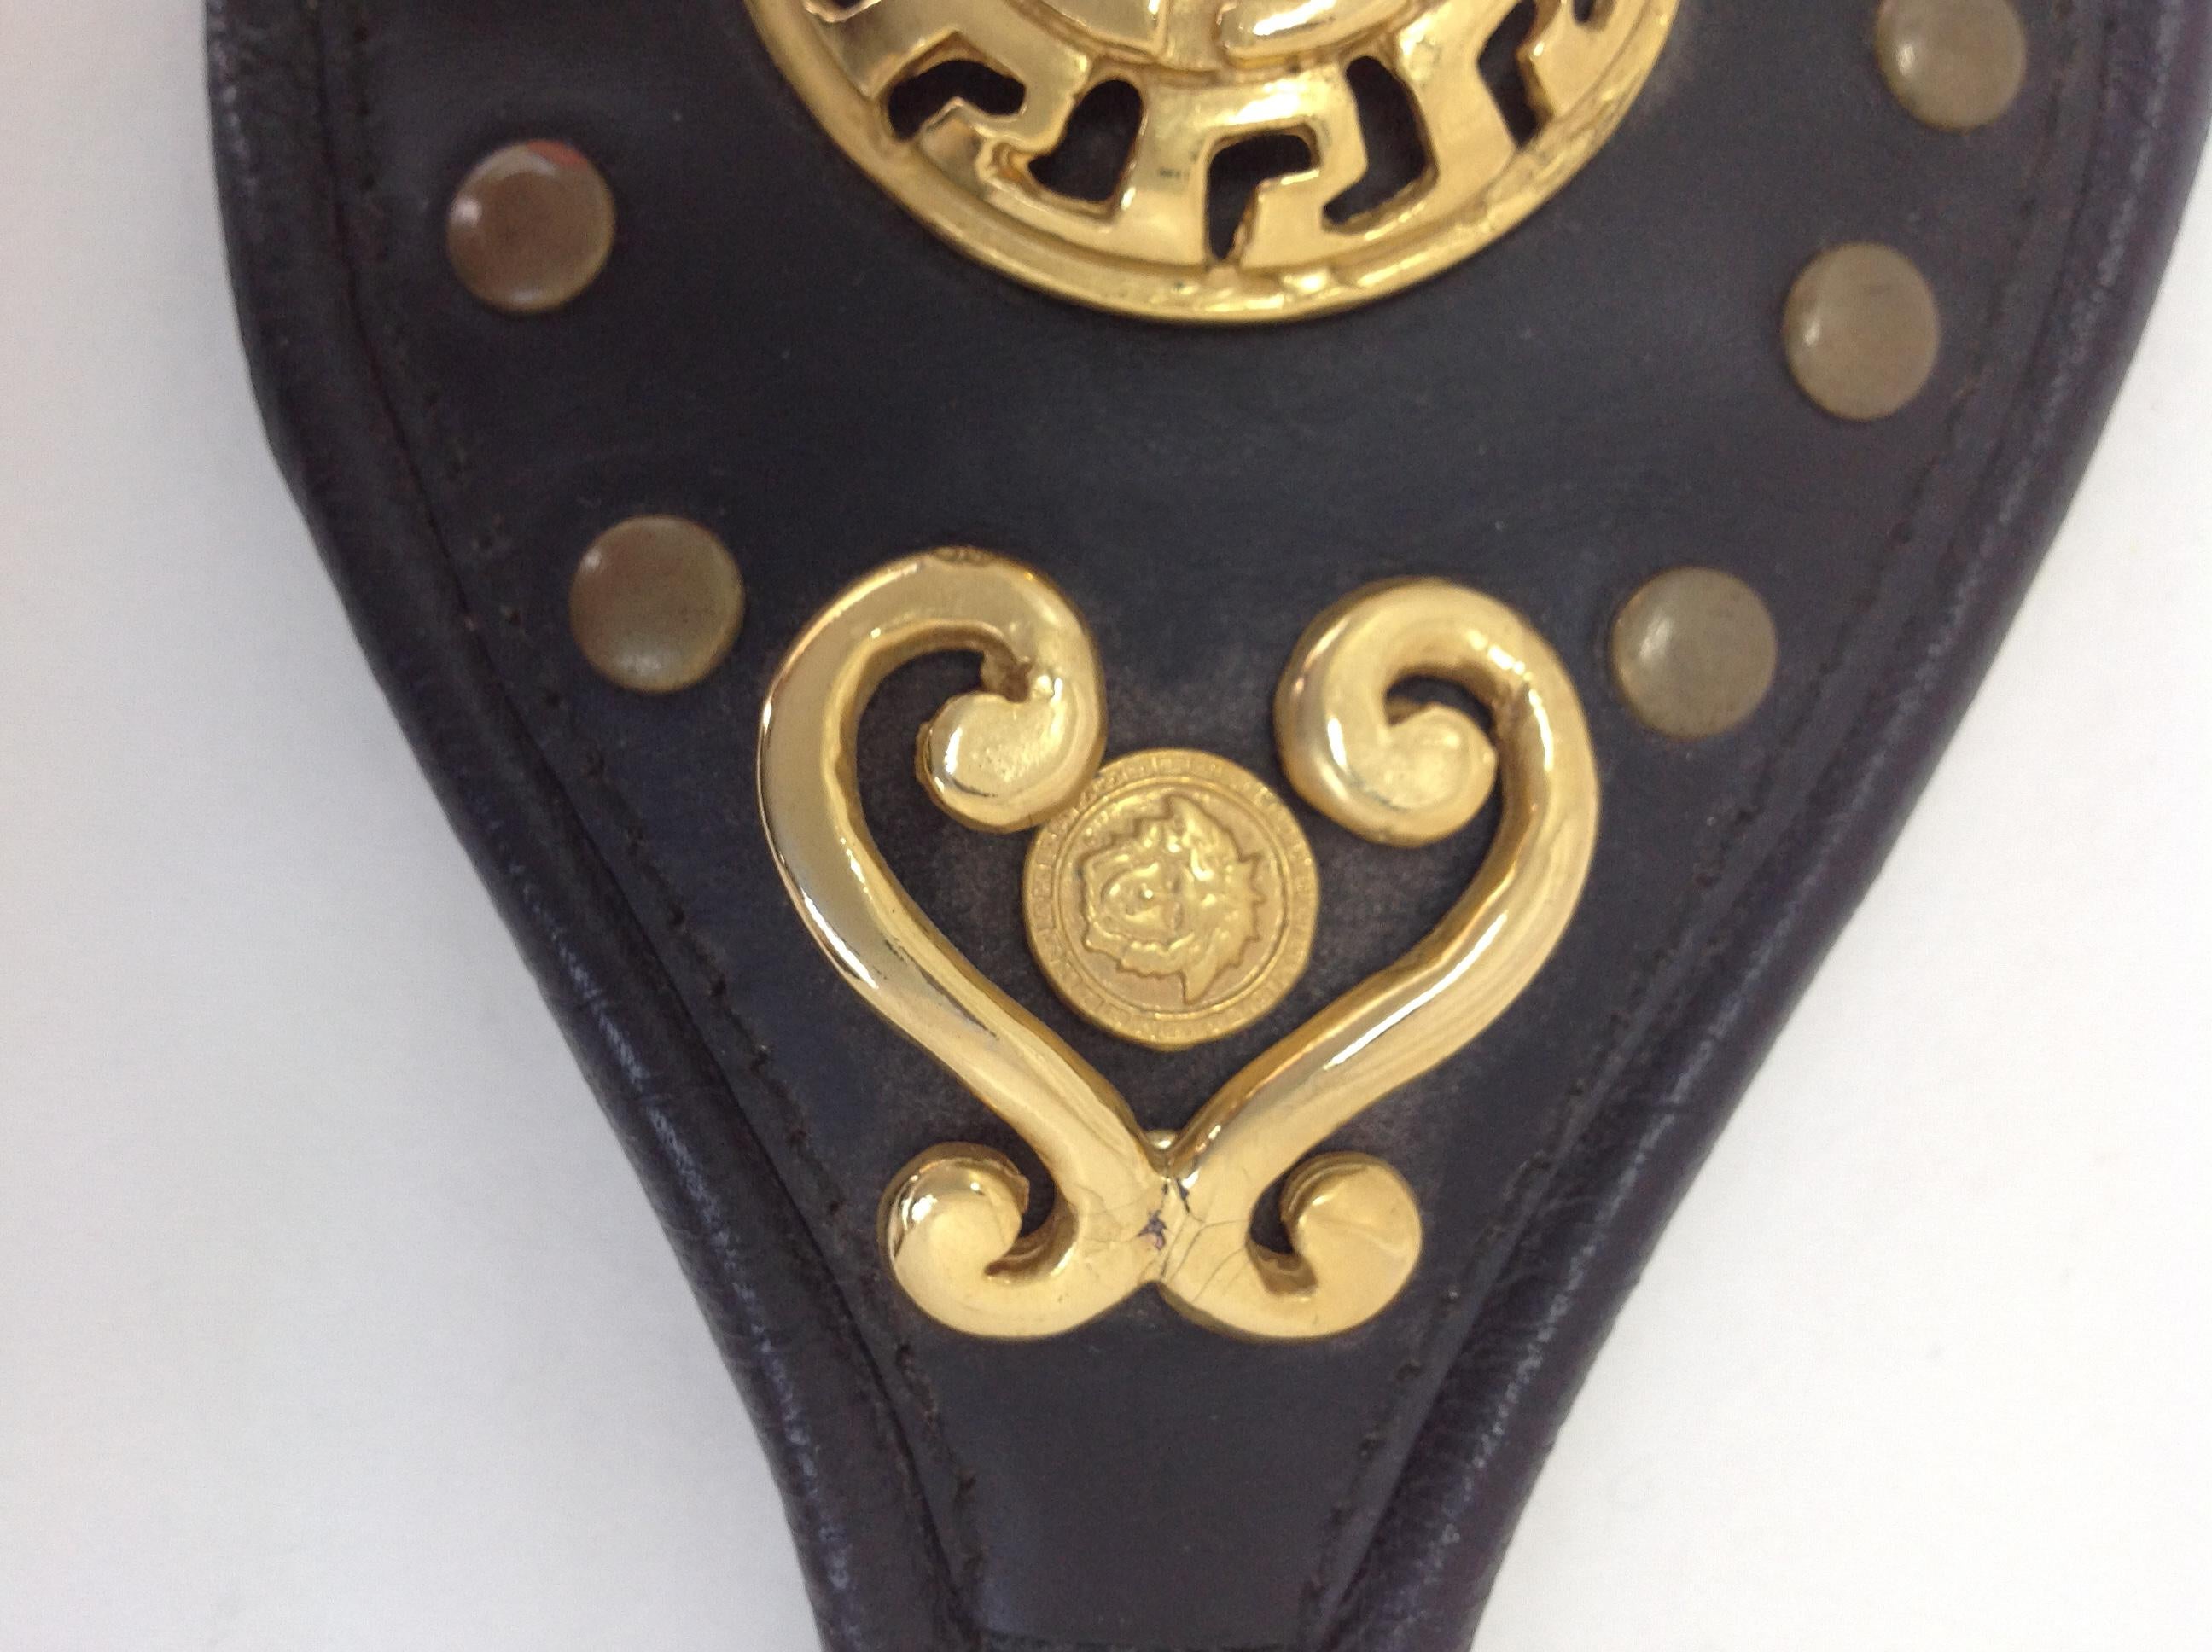 GIANNI VERSACE Bracelet Vintage 1990s Leather Cuff Miami Collection 1993 2